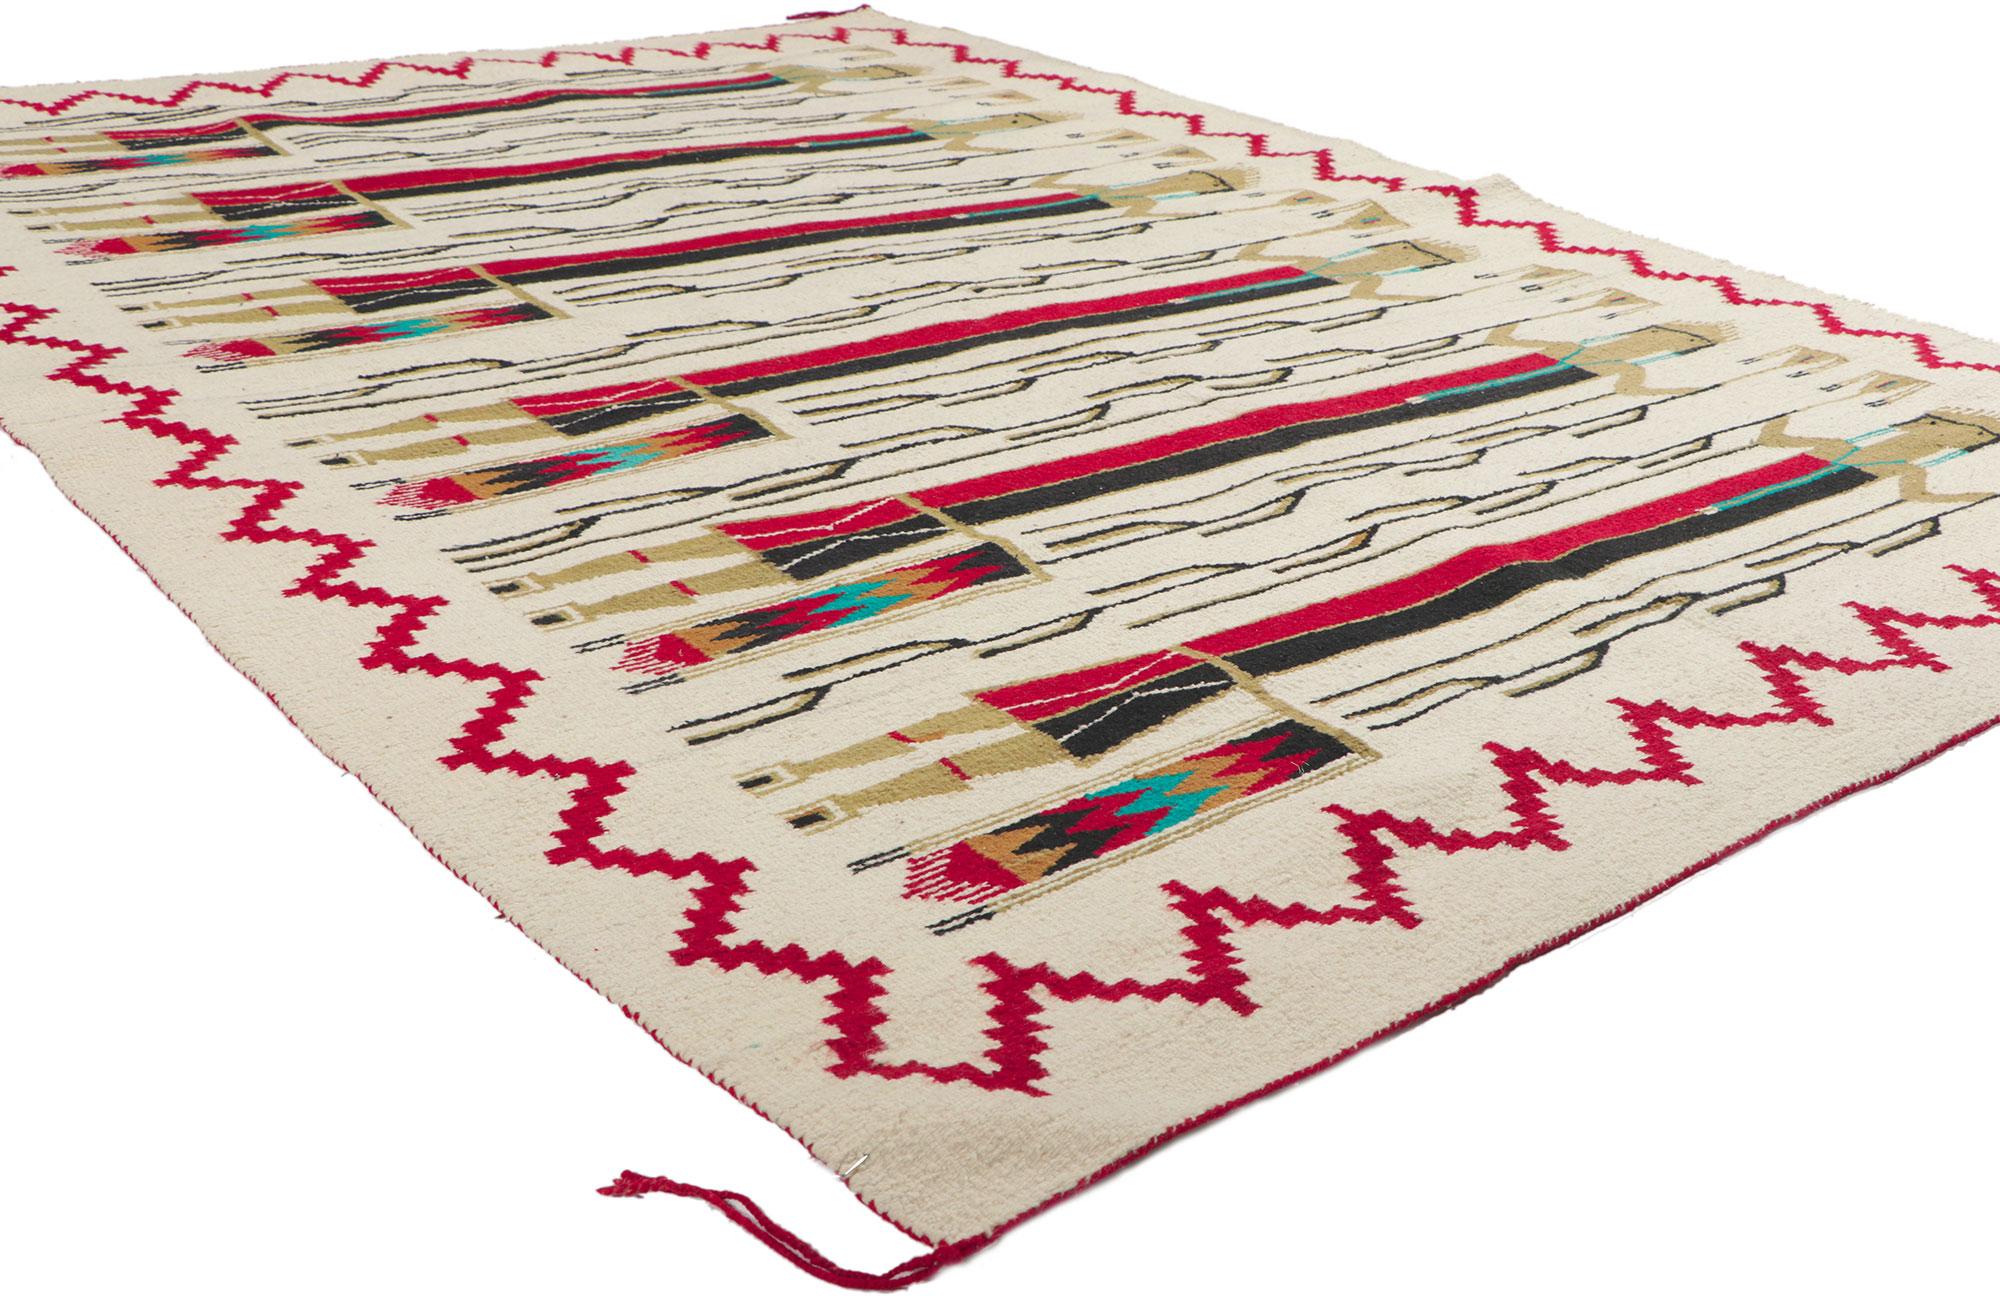 78502 Vintage Yeibichai Navajo Rug, 05'03 x 07'03. Emanating Southwest style with incredible detail and texture, this handwoven vintage Navajo Yeibichai rug is a captivating vision of woven beauty. The eye-catching Yeibichai pictorial and earthy